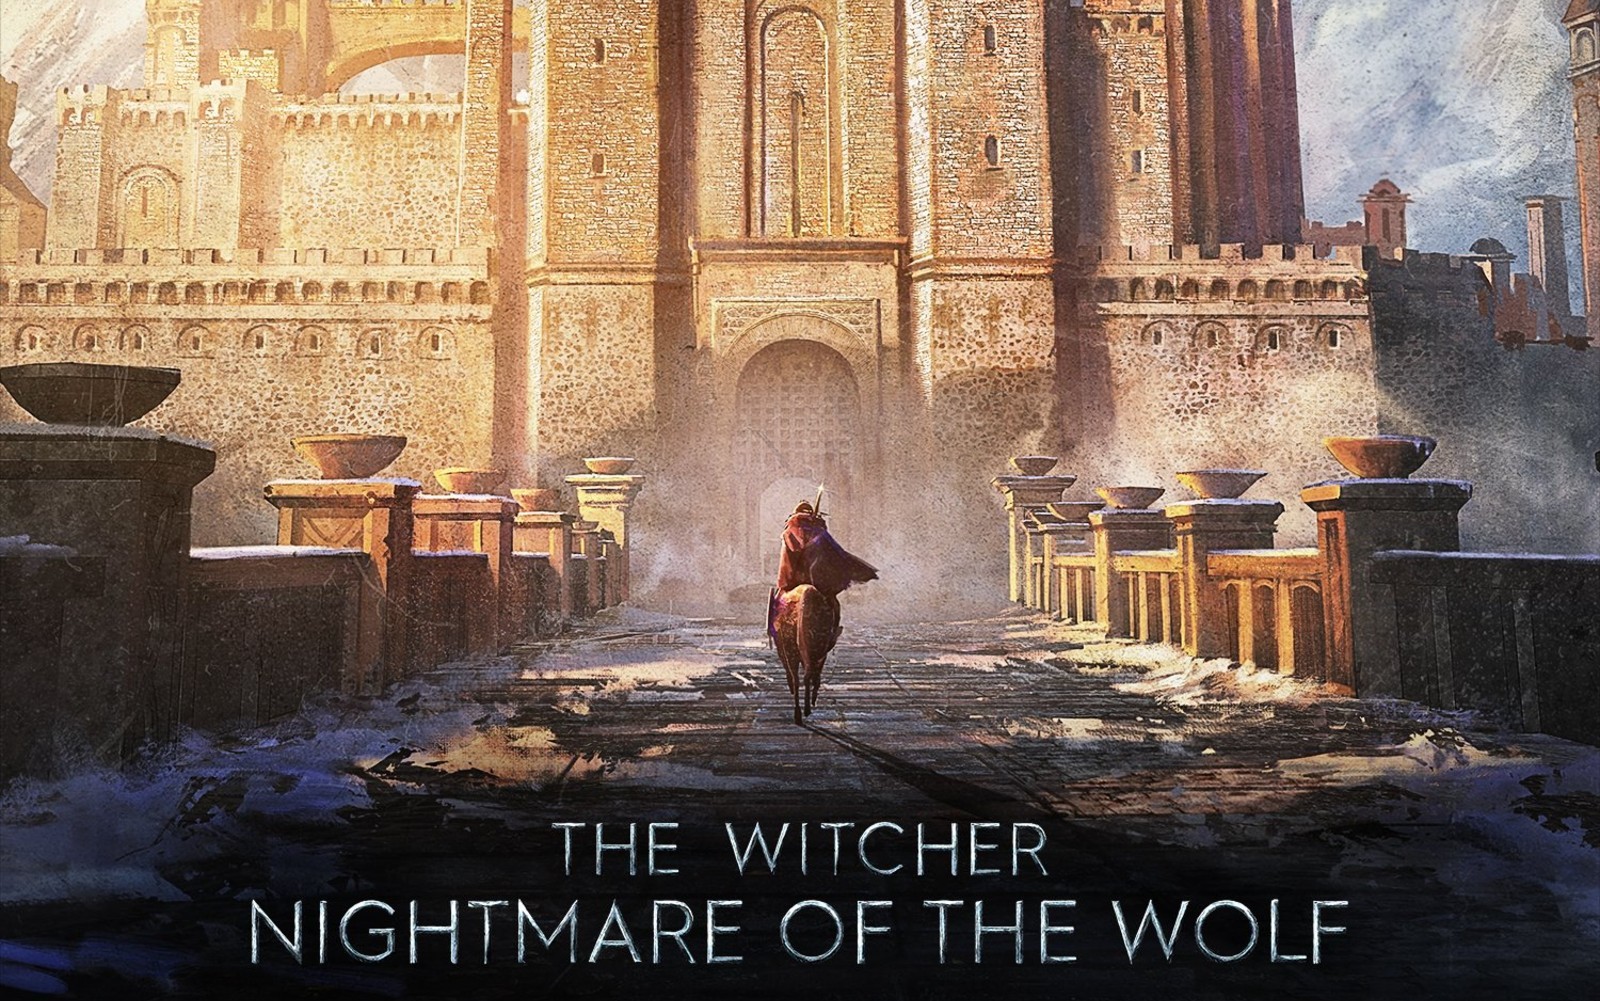 The Witcher: Nightmare of the Wolf arriva il 23 agosto